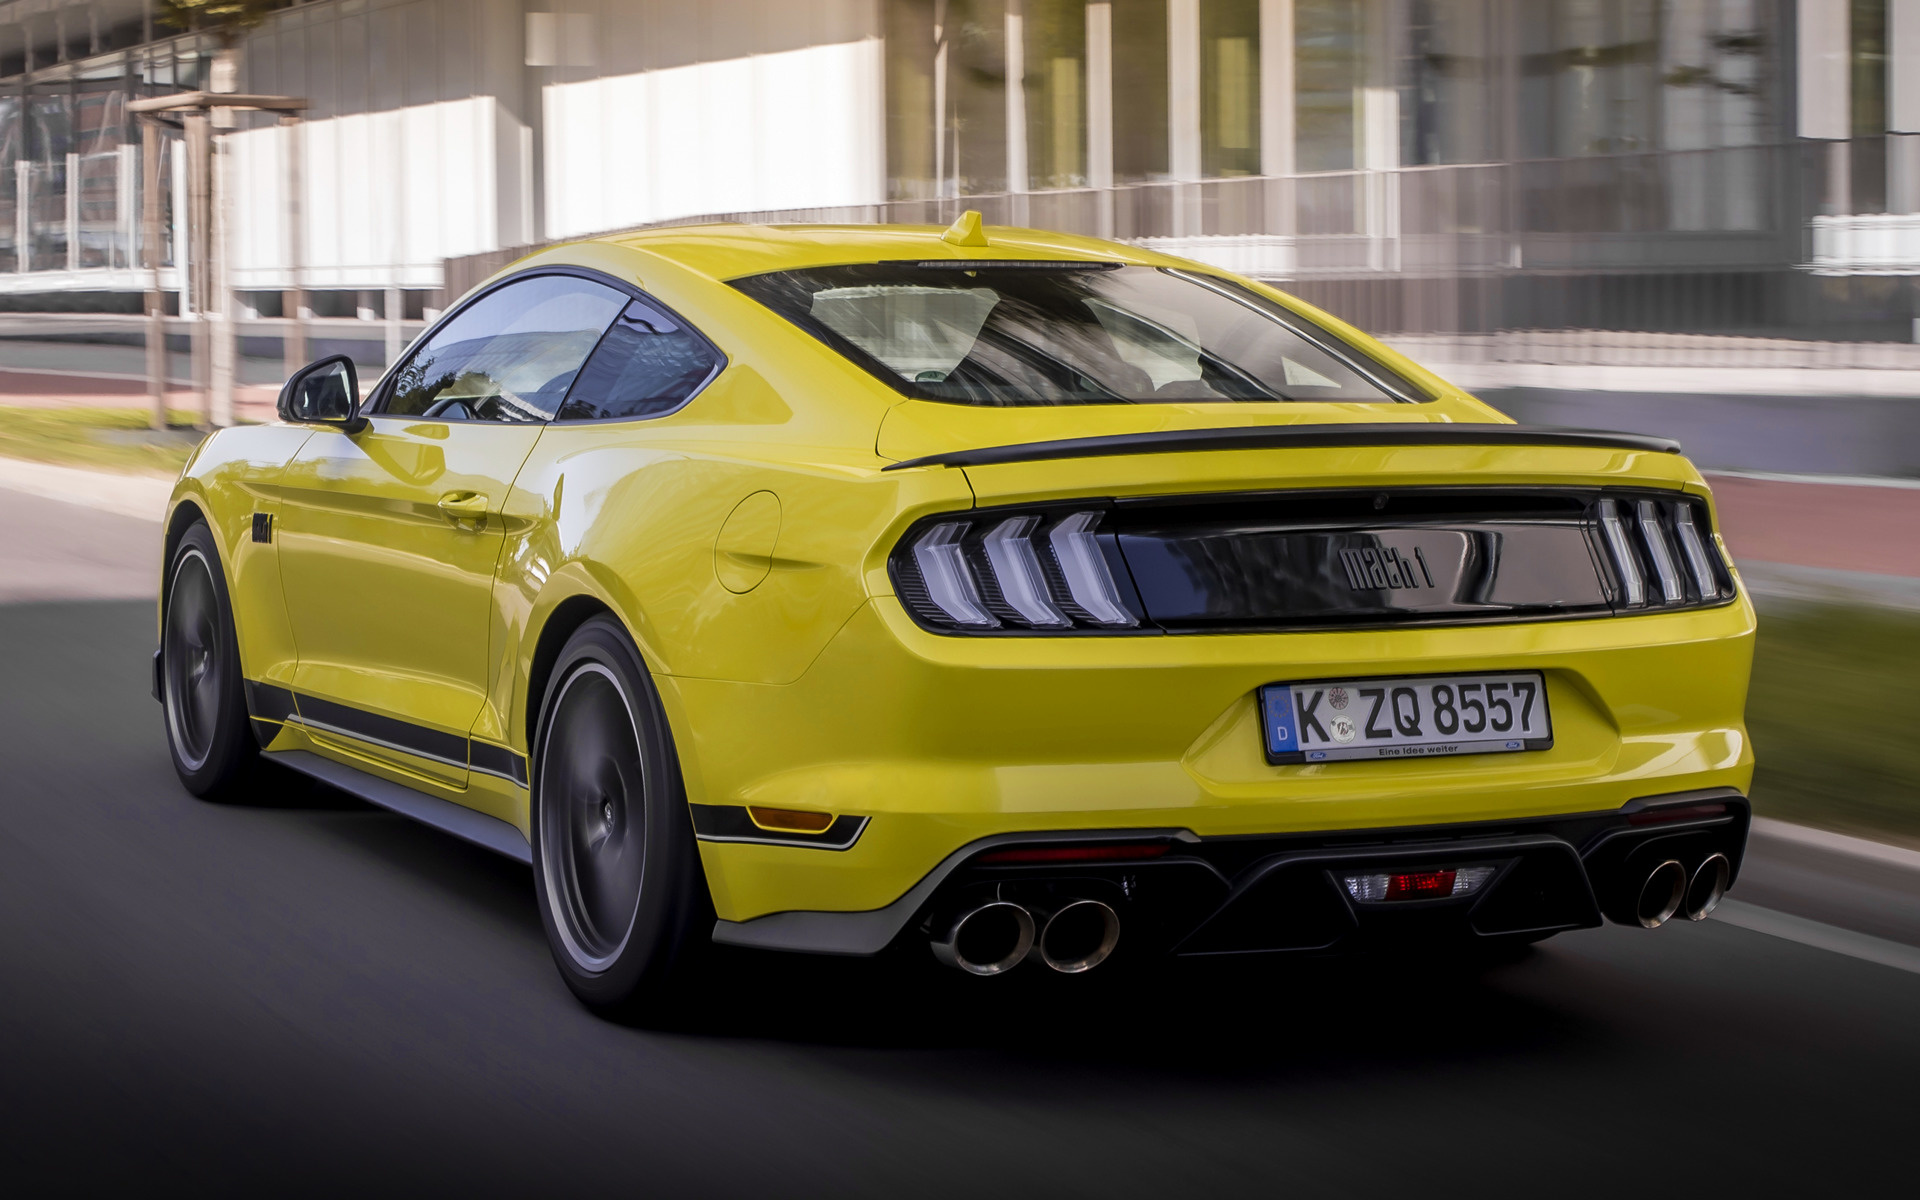 2021 Ford Mustang Mach 1 (EU) - Wallpapers and HD Images | Car Pixel